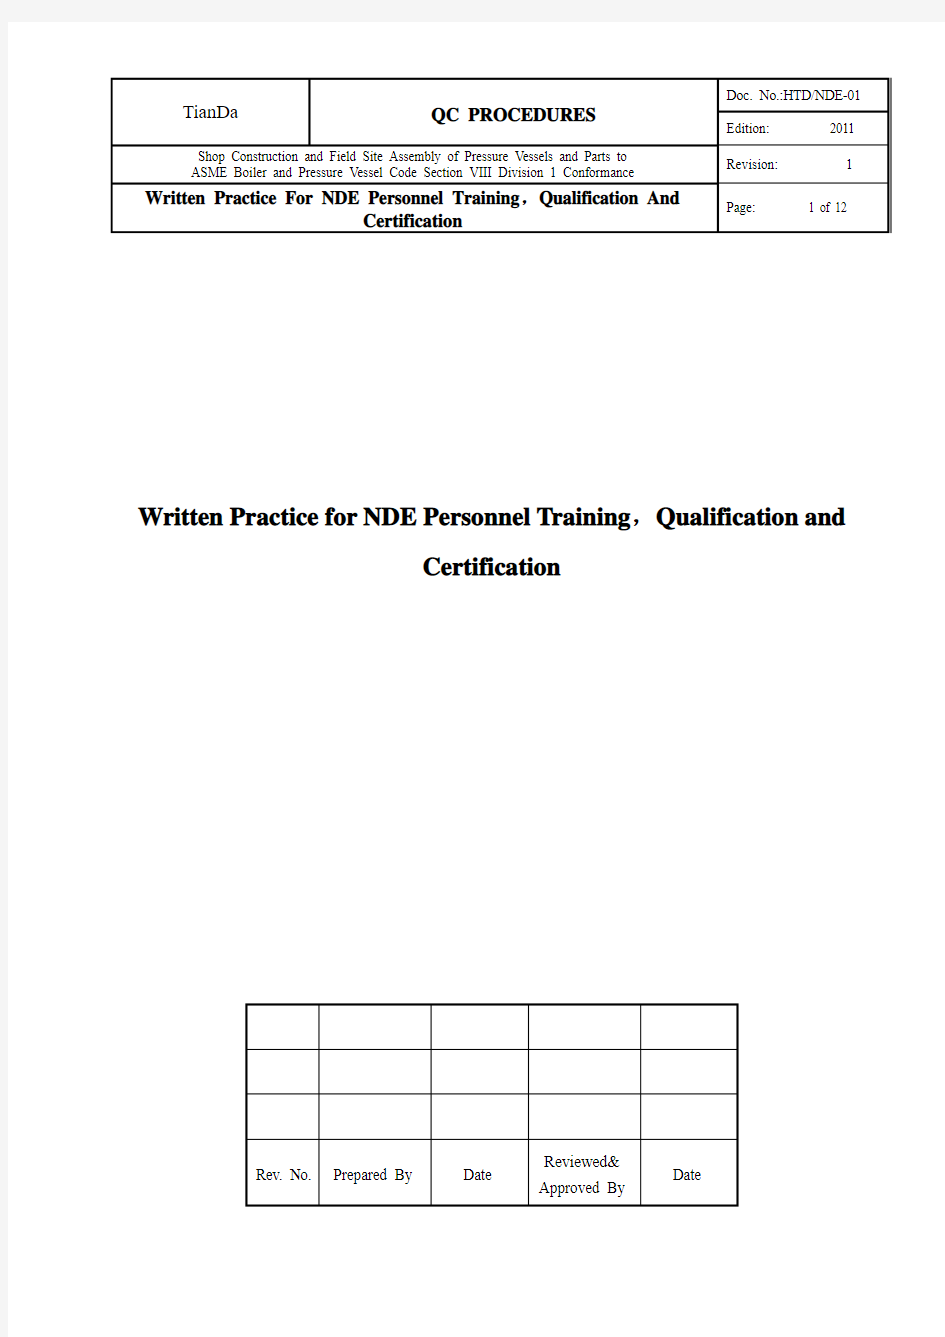 NDE-01-WRITTEN PRACTICE FOR NDE PERSONNEL TRAINING, QUALIFICATION AND CERTIFICATION